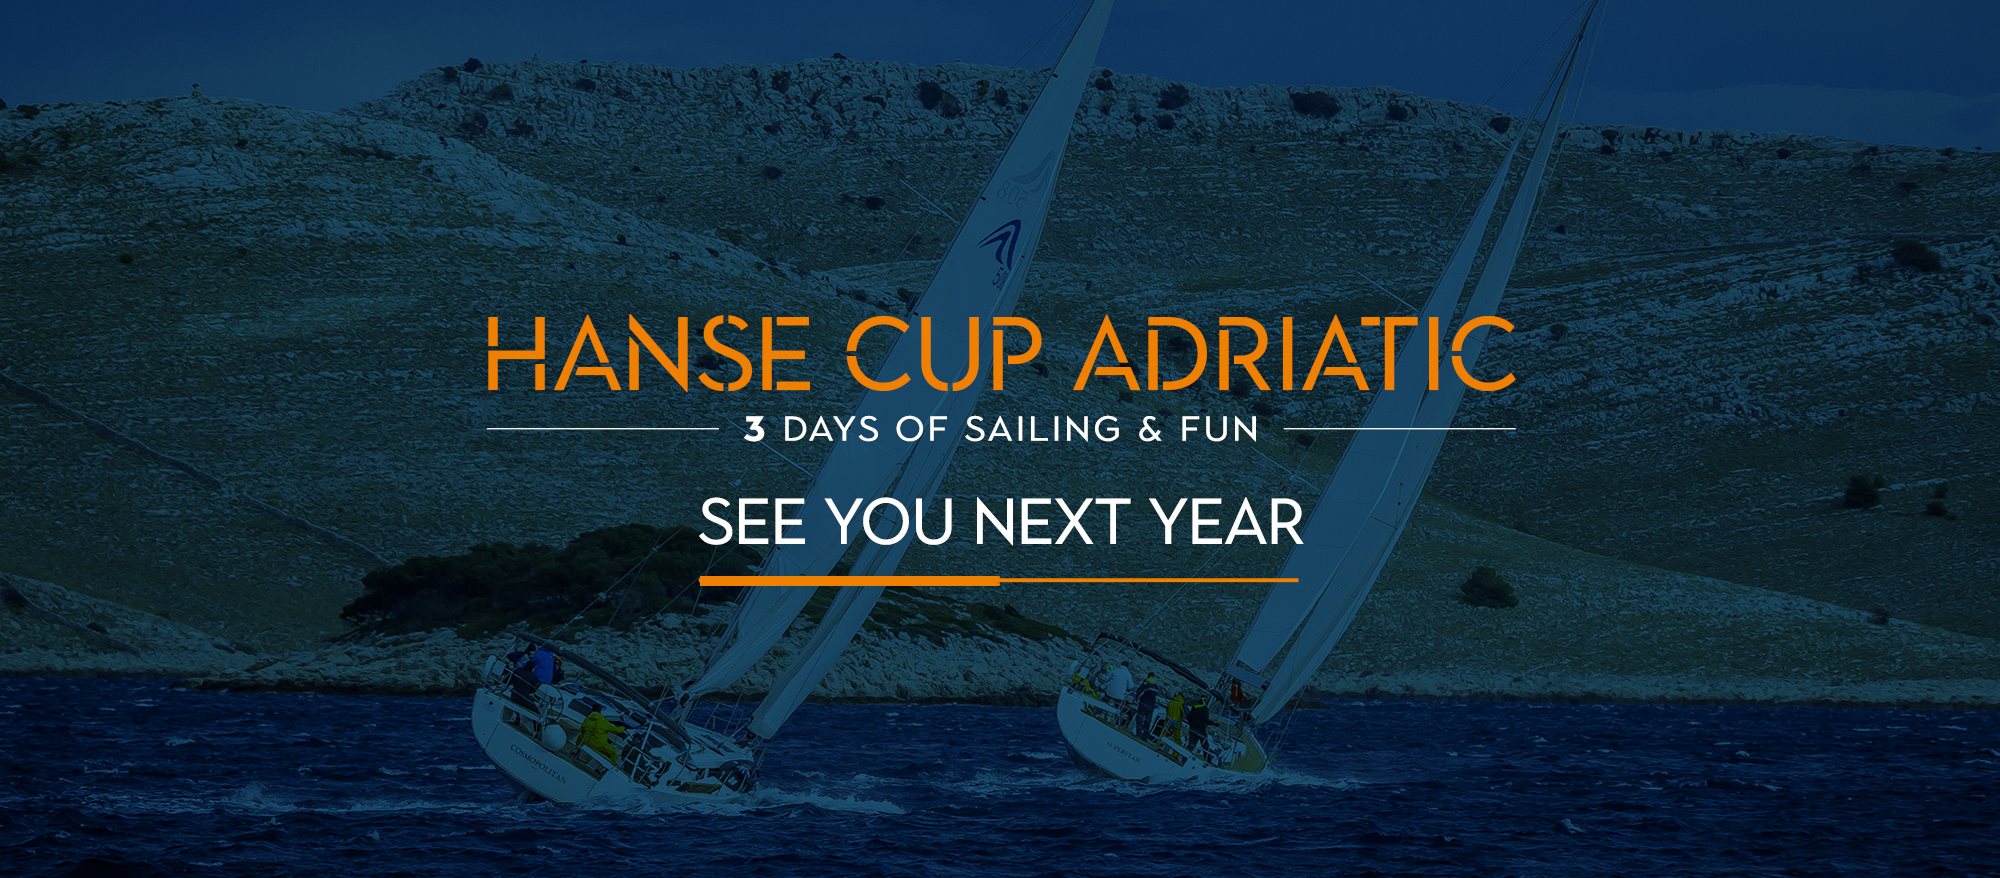 Thank you for participating in 10th Hanse cup Adriatic